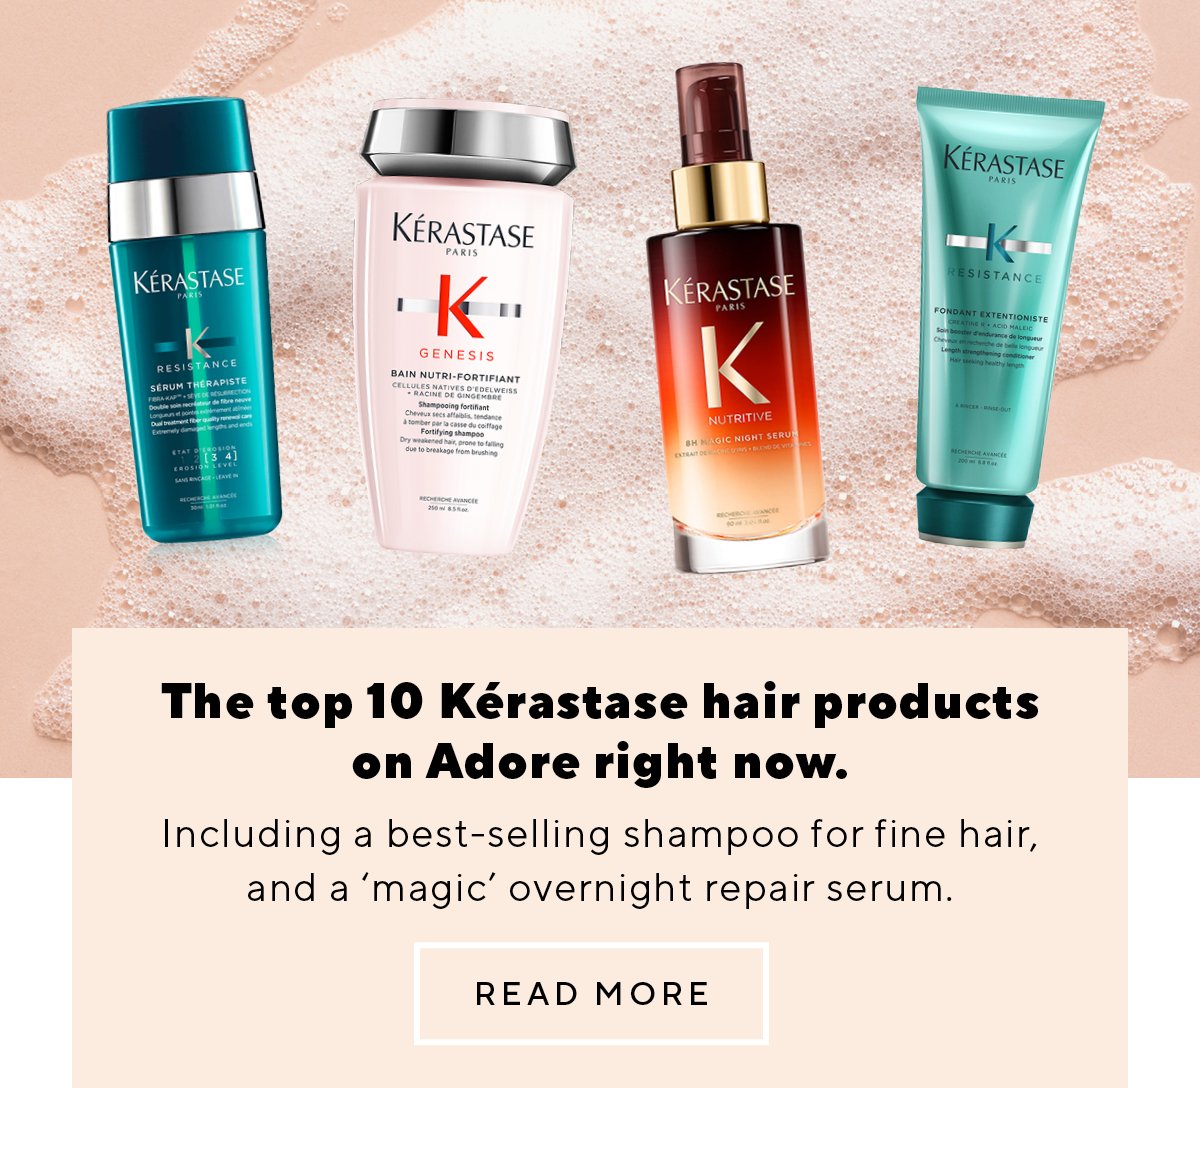 The top 10 Kérastase hair products on Adore right now.